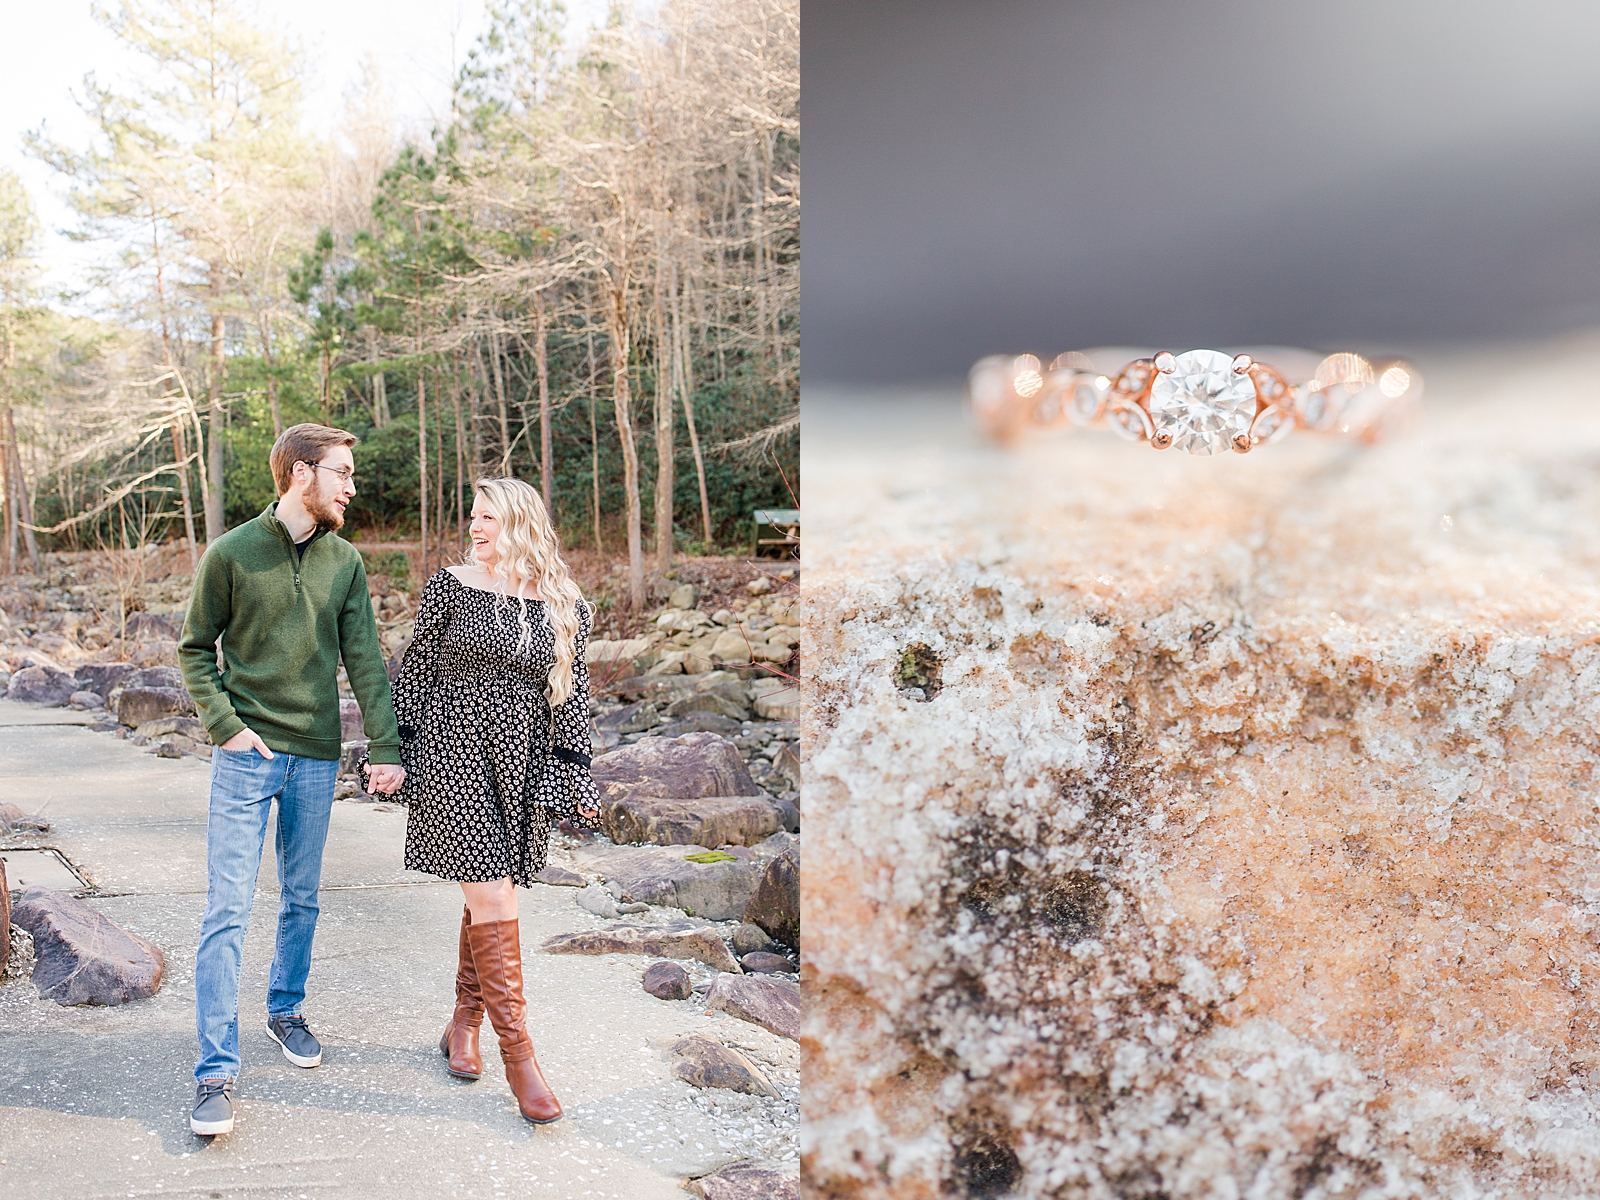 Ocoee River Engagement Session Cody and Haley walking holding hands and detail of engagement ring Photos